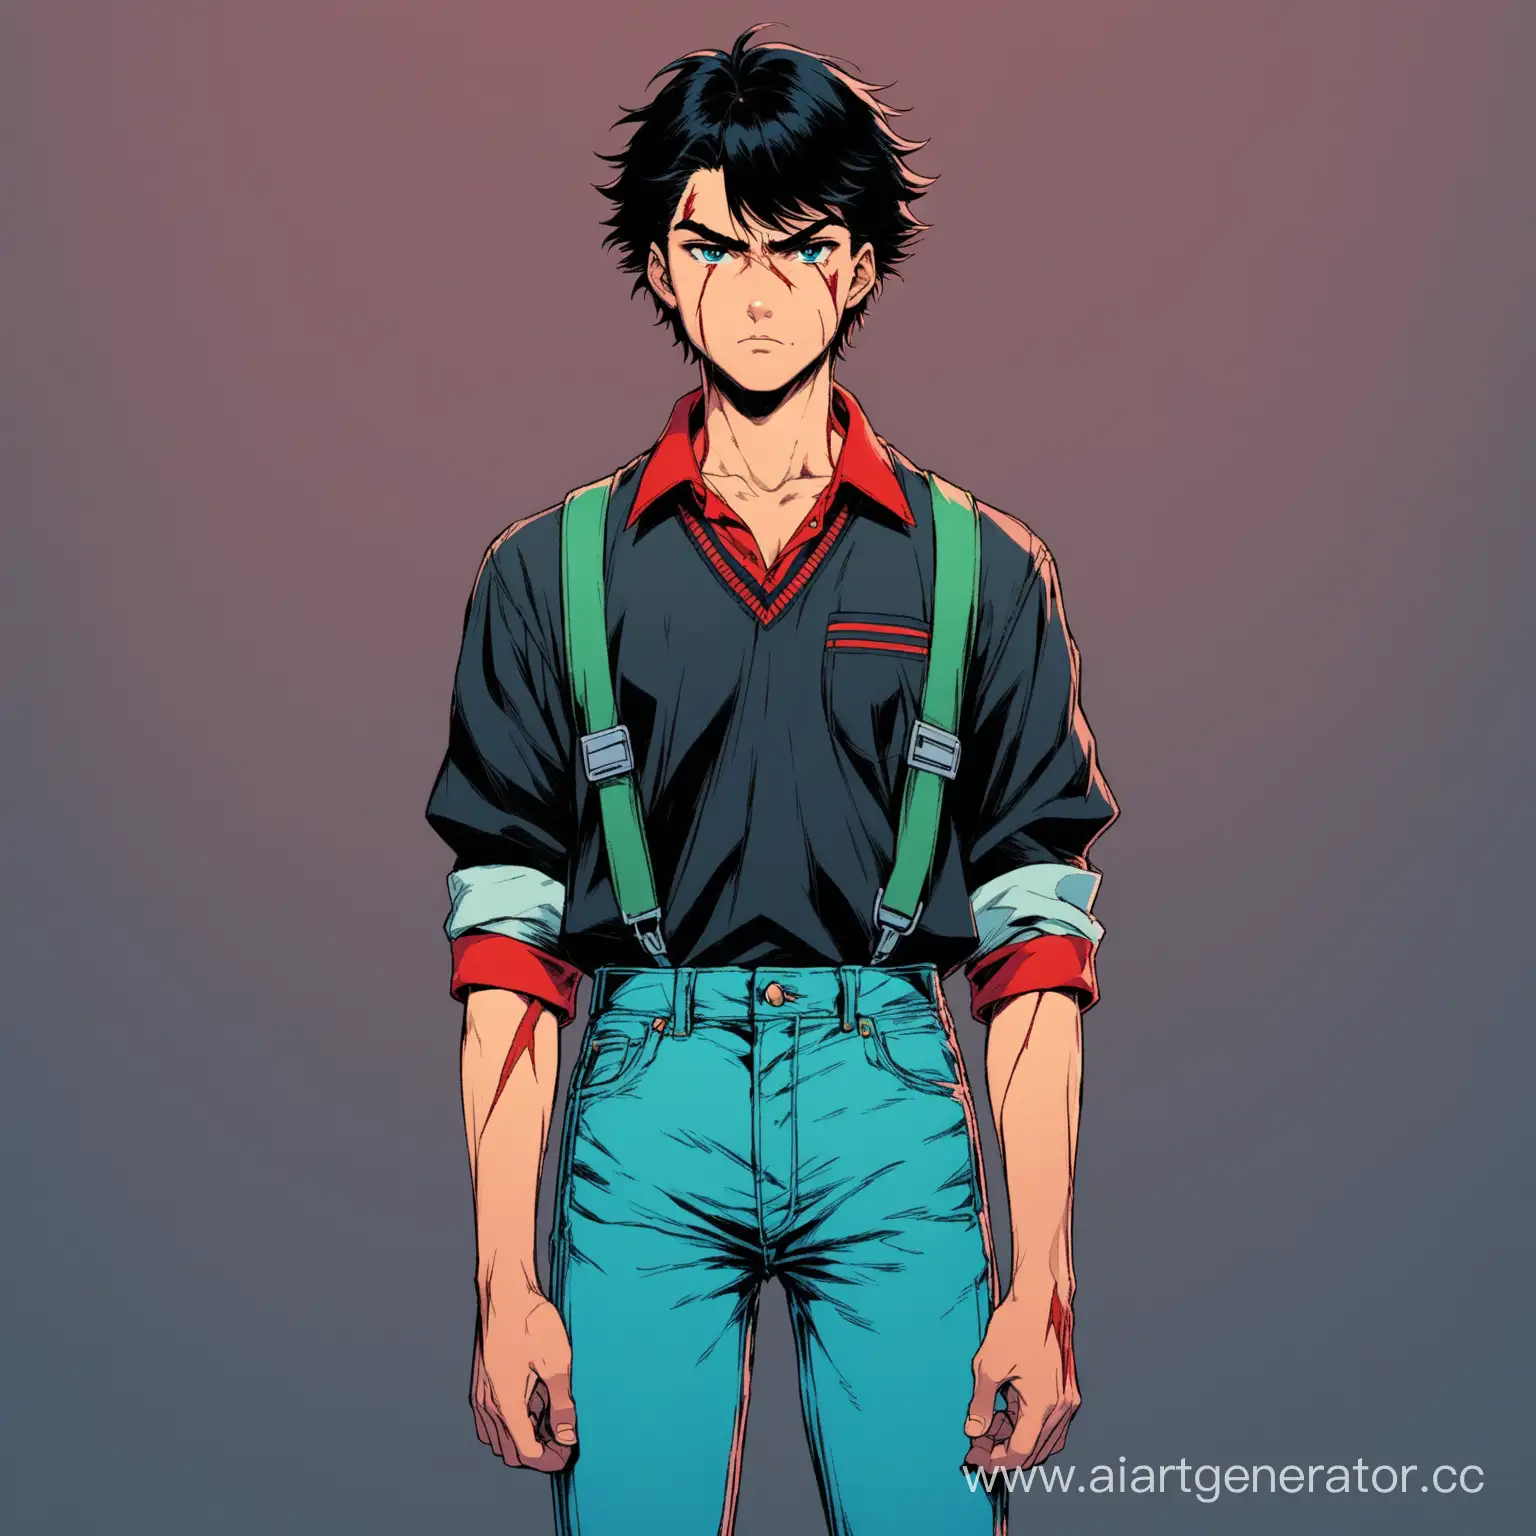 guy, tall, serious, gloomy, big scar on his face, short black hair, blue eyes, school uniform in the style of the 80s, jeans, green and red colors